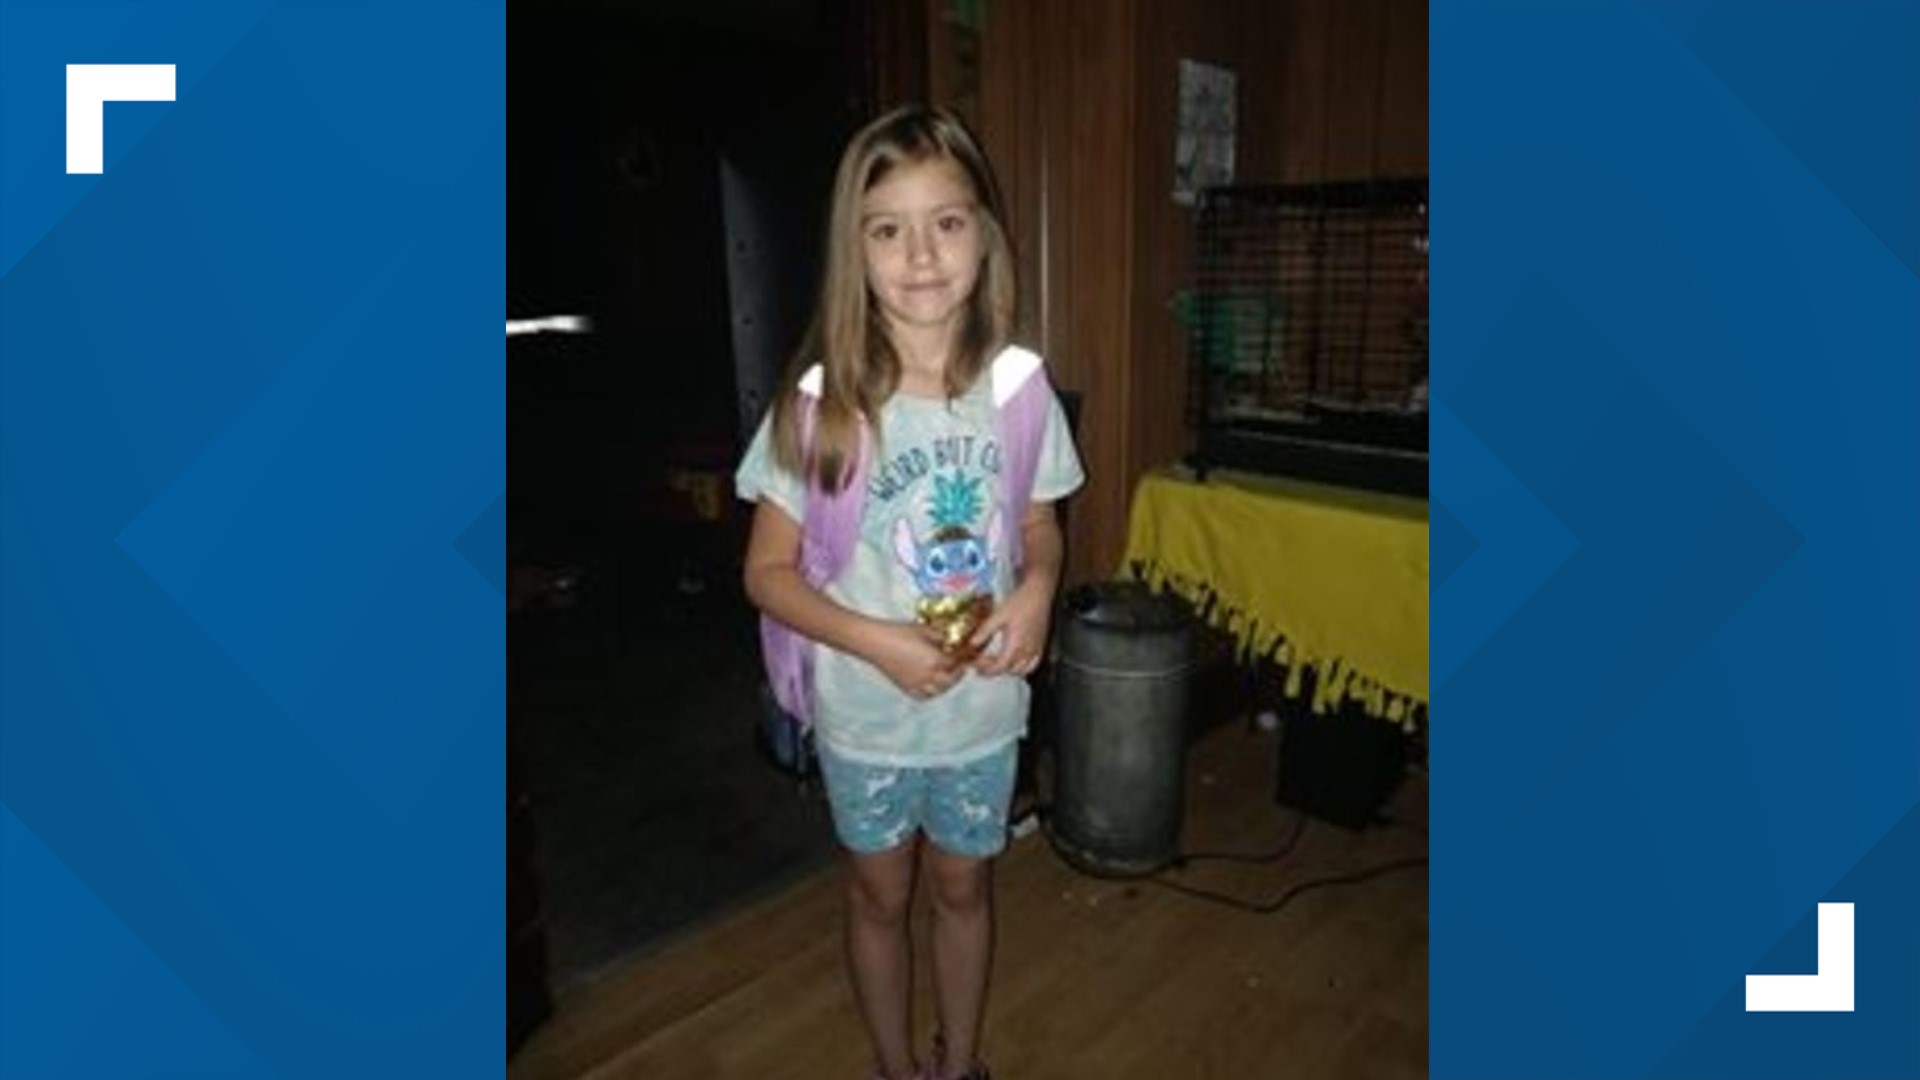 The Hardin County Sheriff's Office said Trinity Hurt was found, but did not say where exactly.